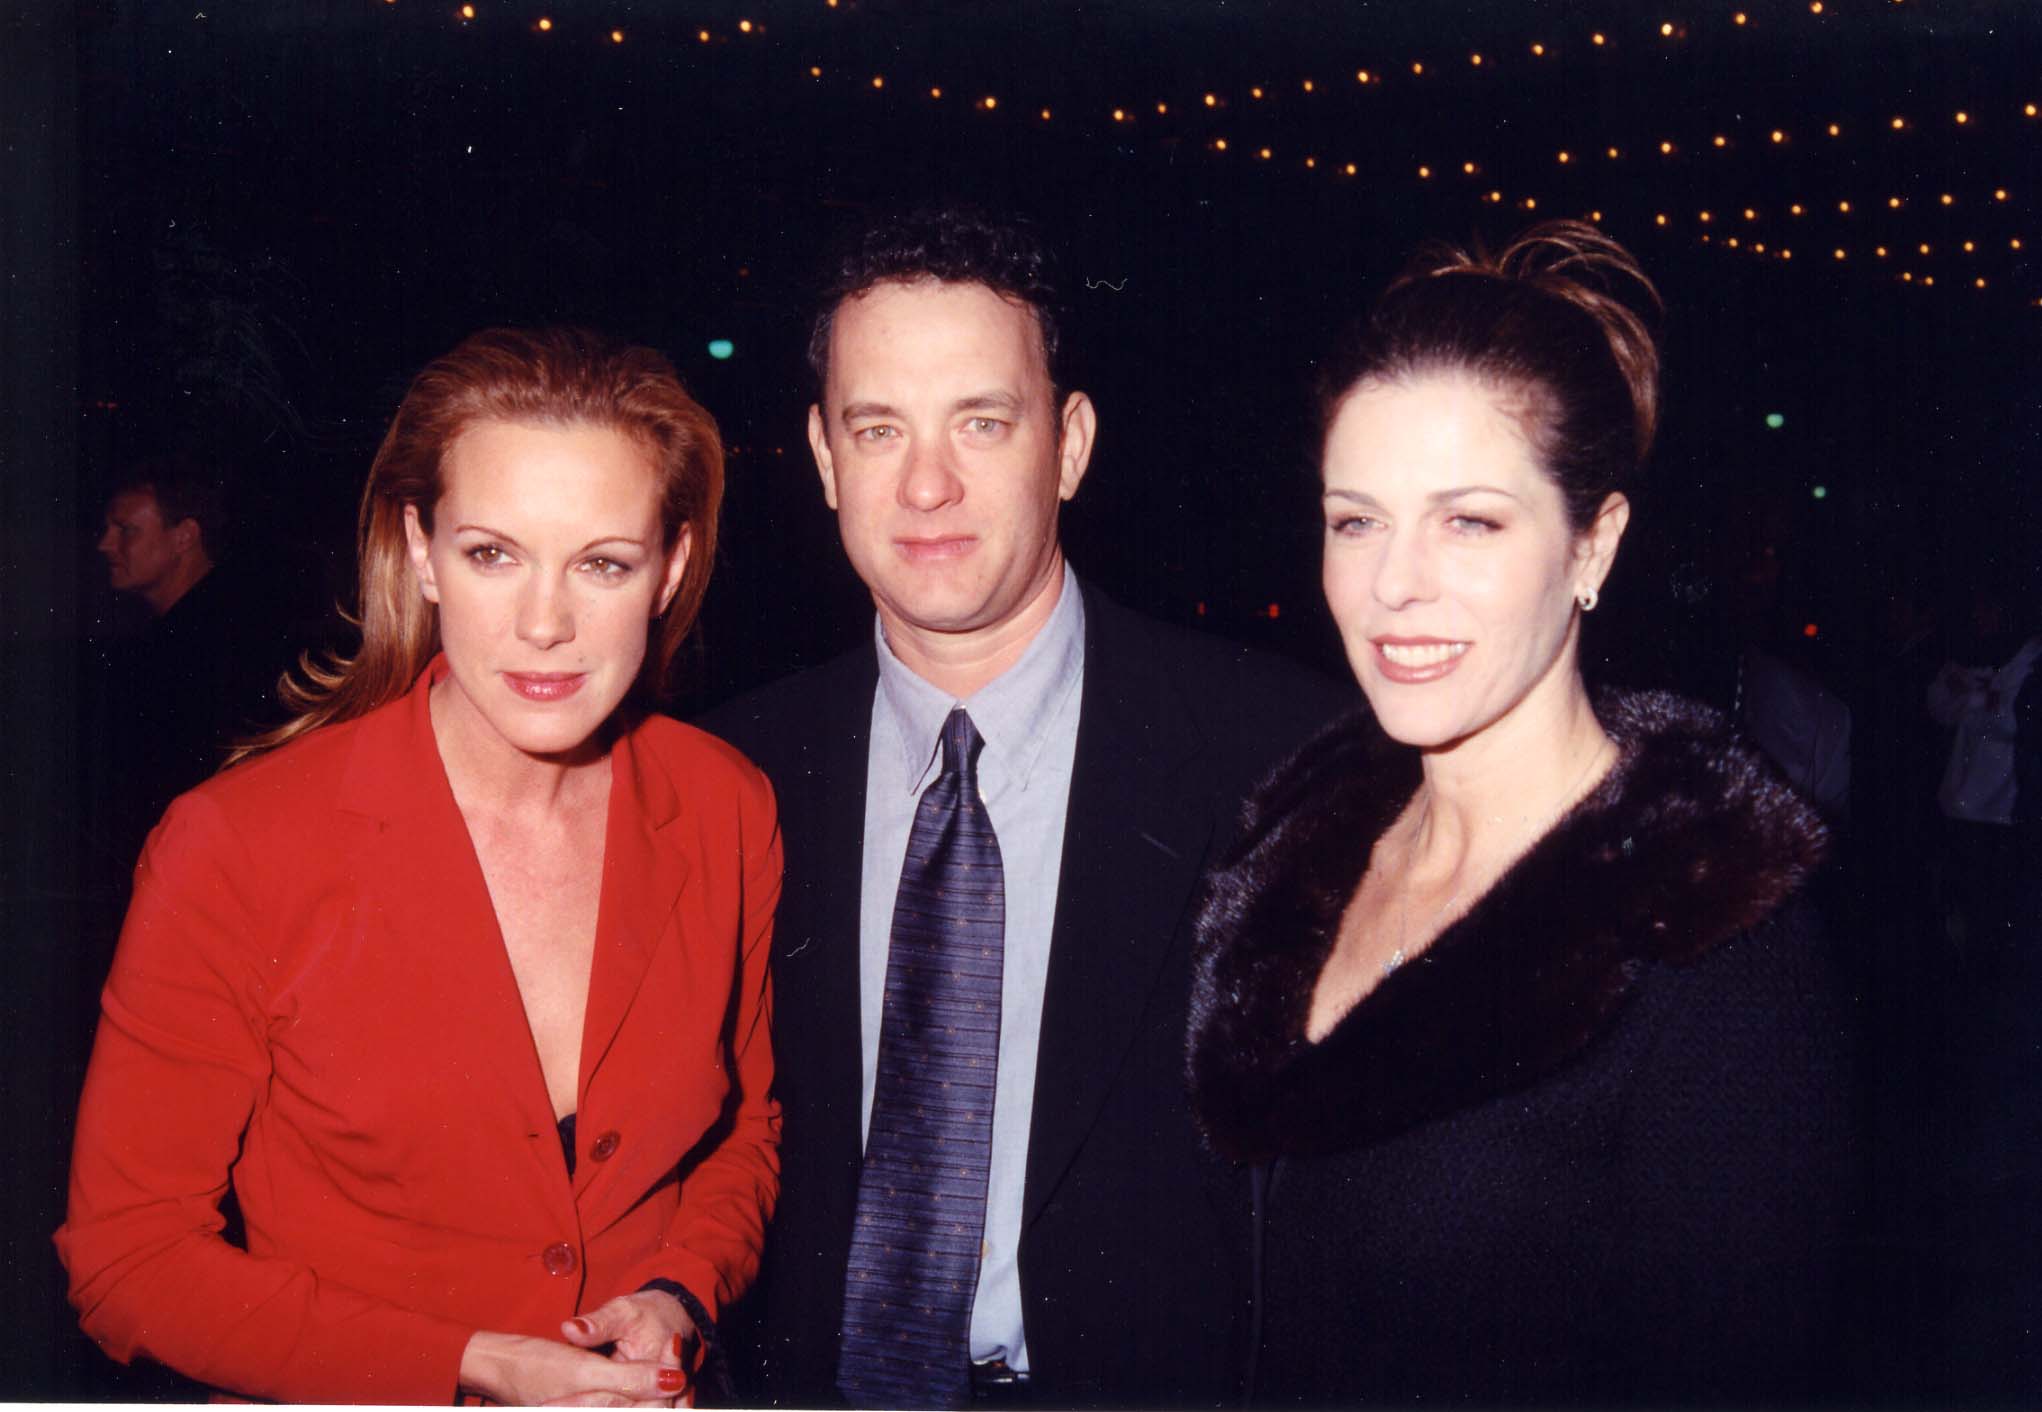 Elizabeth Perkins, Tom Hanks and Rita Wilson at the "Earth to Moon" premiere in Los Angeles, 1998 | Source: Getty Images